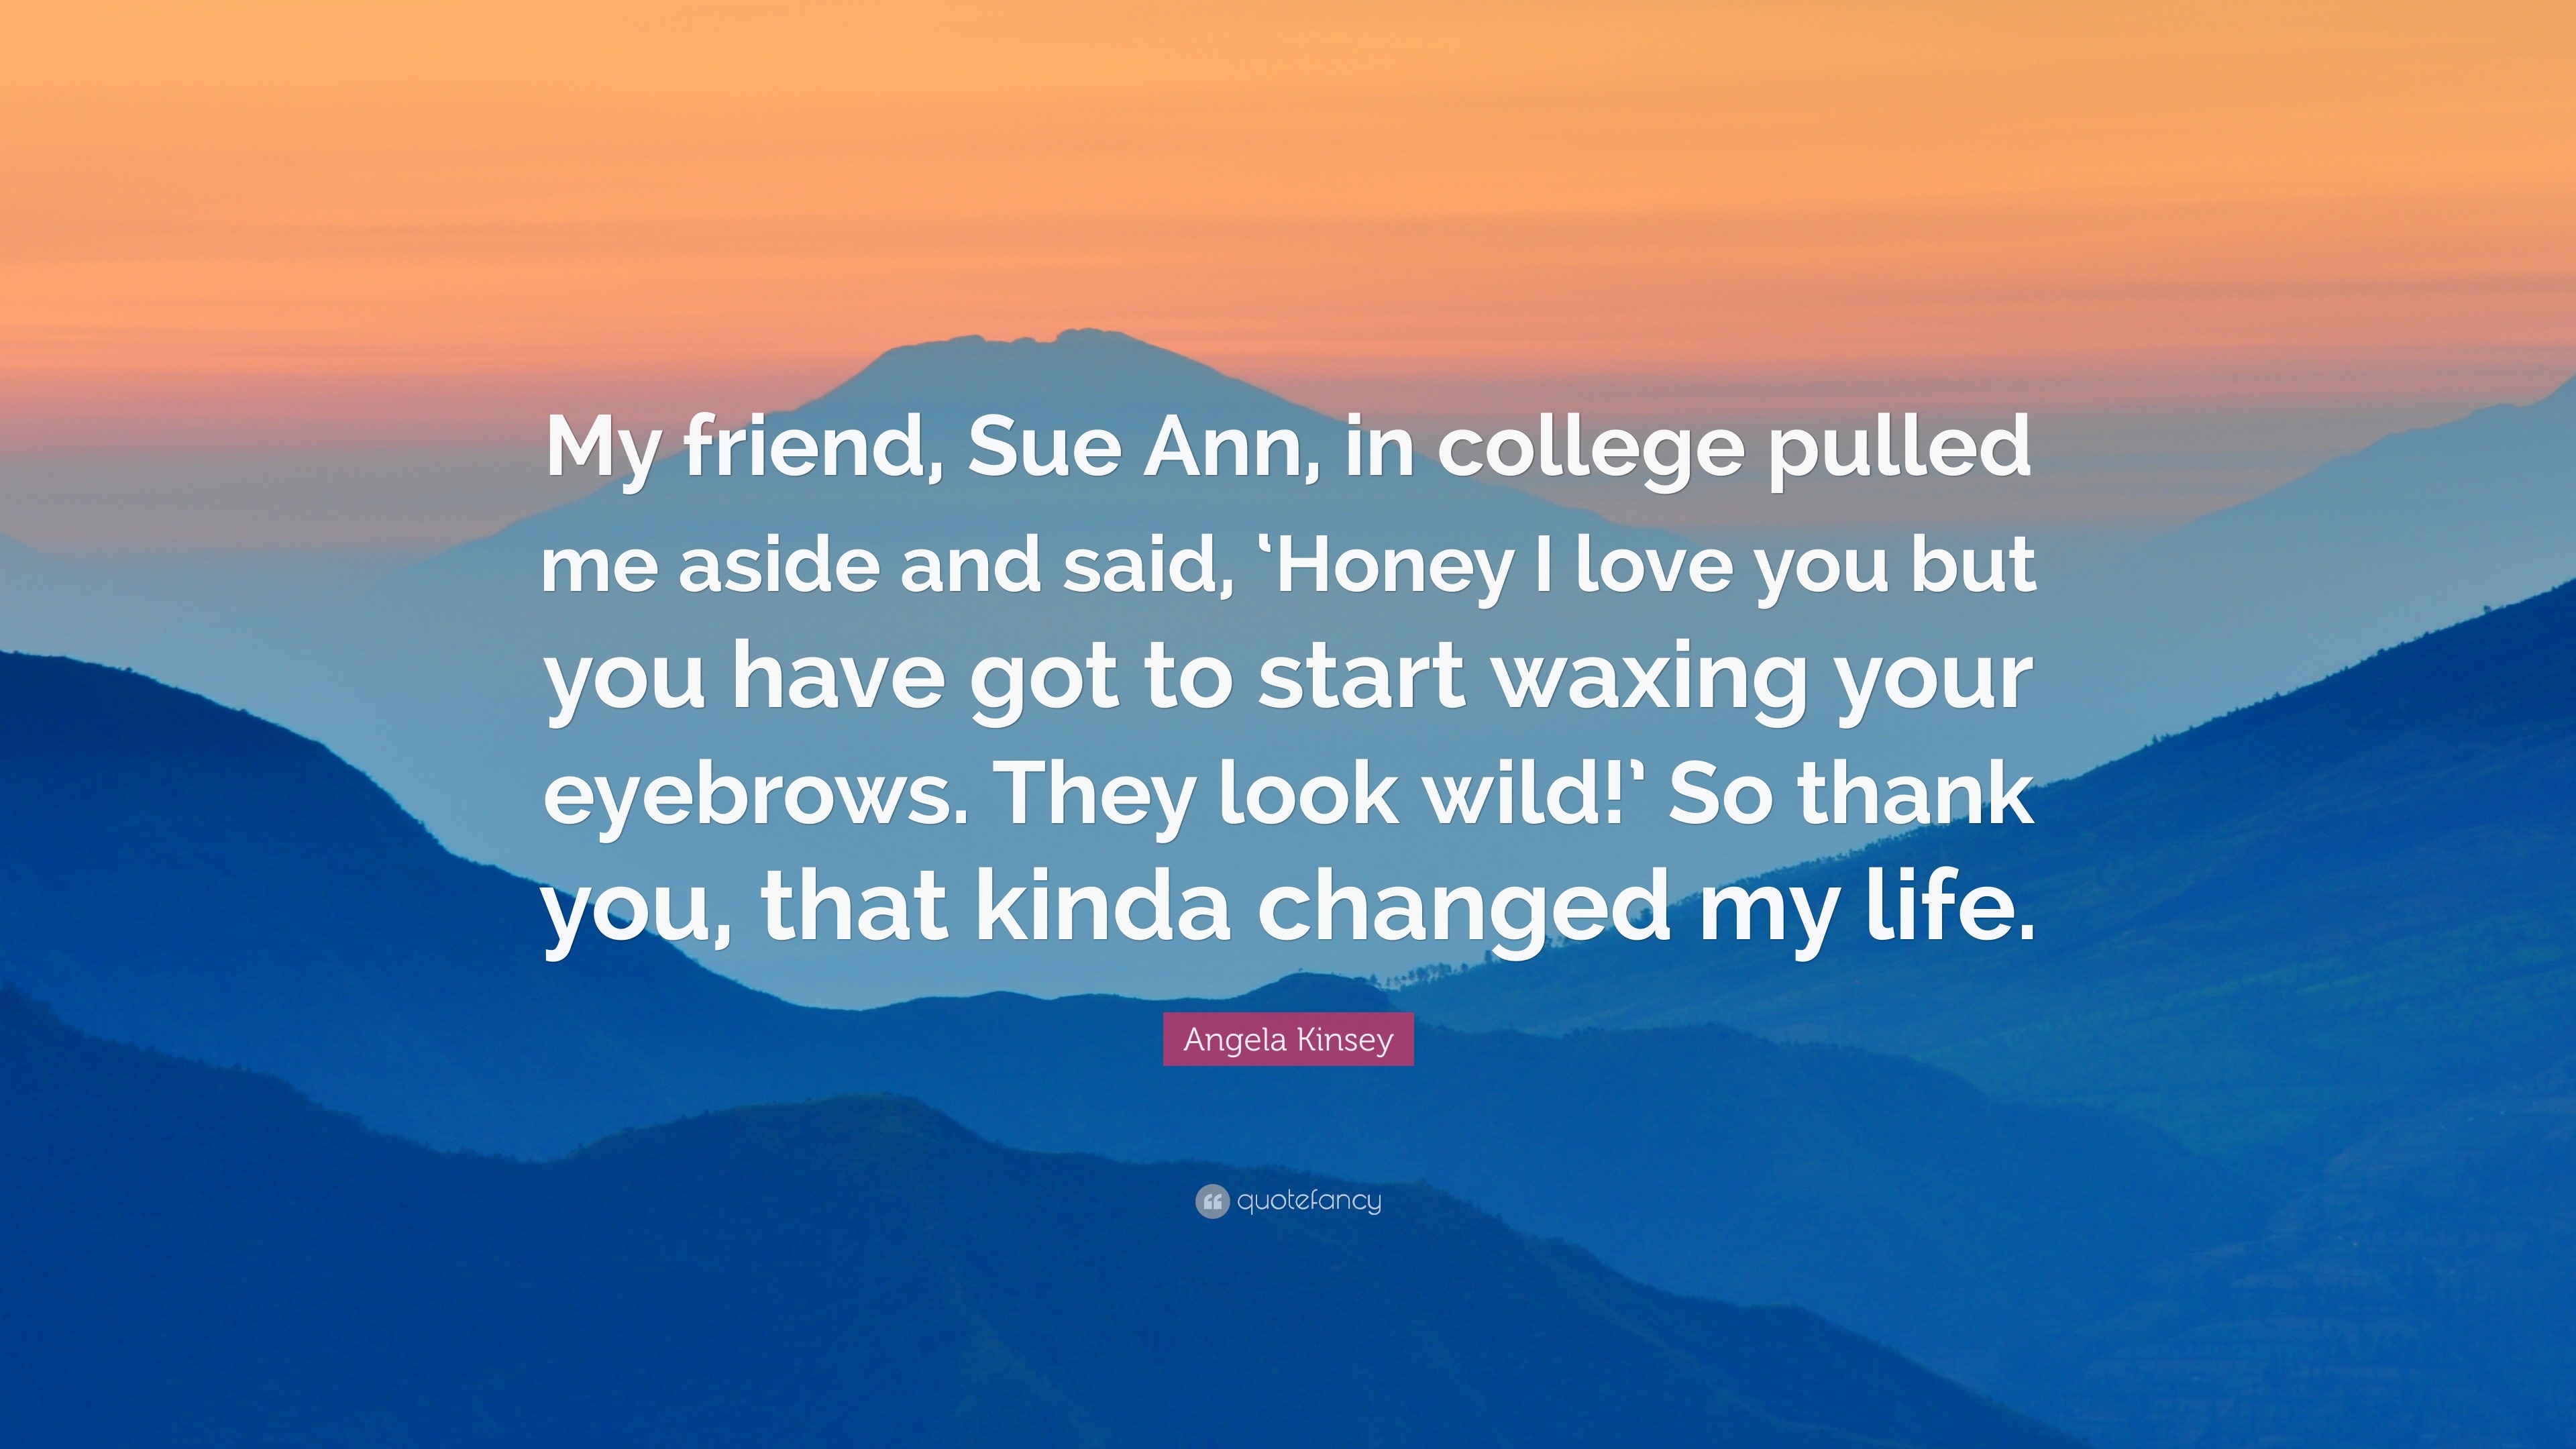 Angela Kinsey Quote “My friend Sue Ann in college pulled me aside